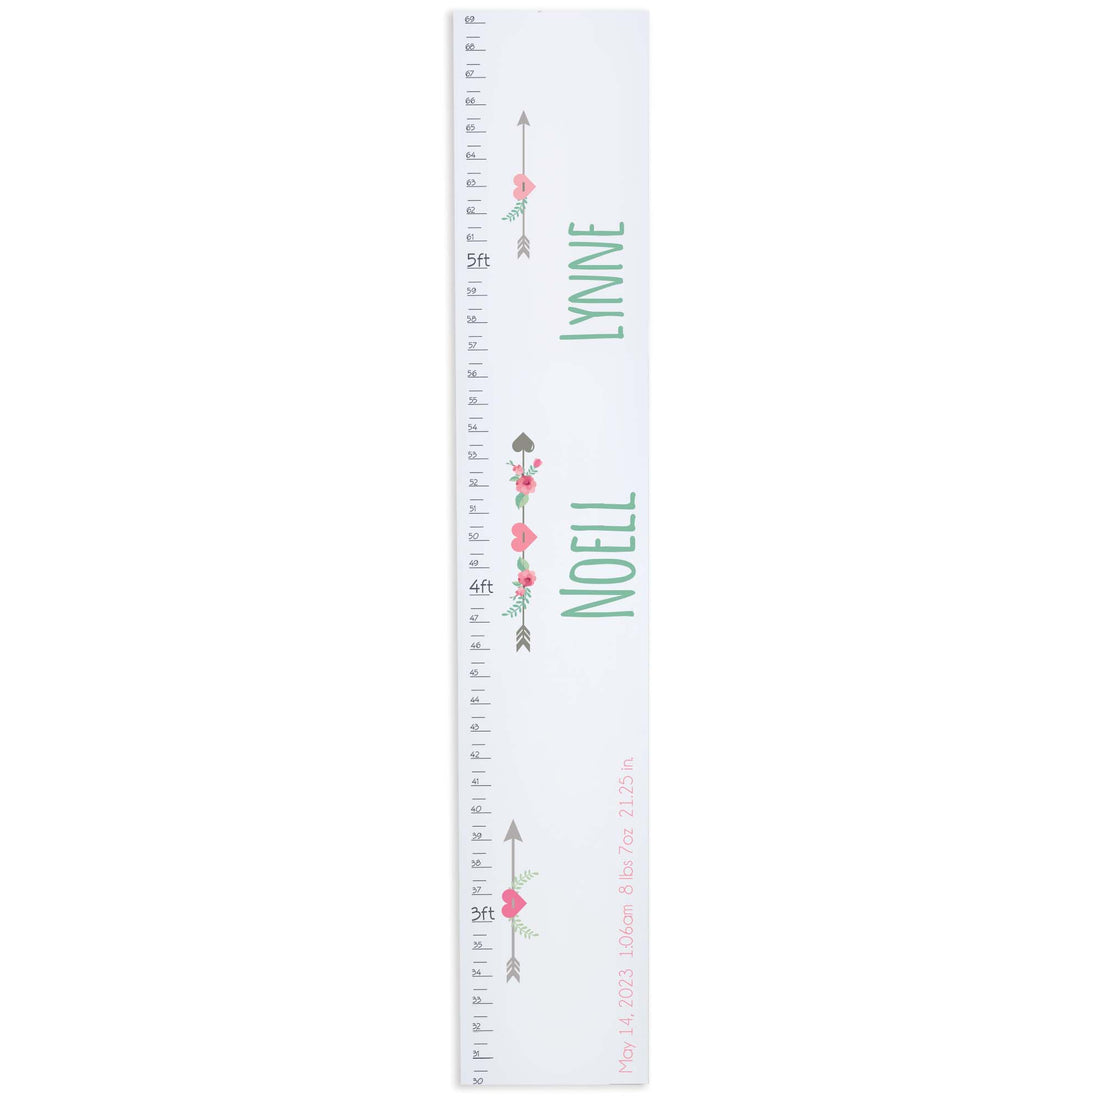 Girl's Tribal Arrow Growth Chart with birth information